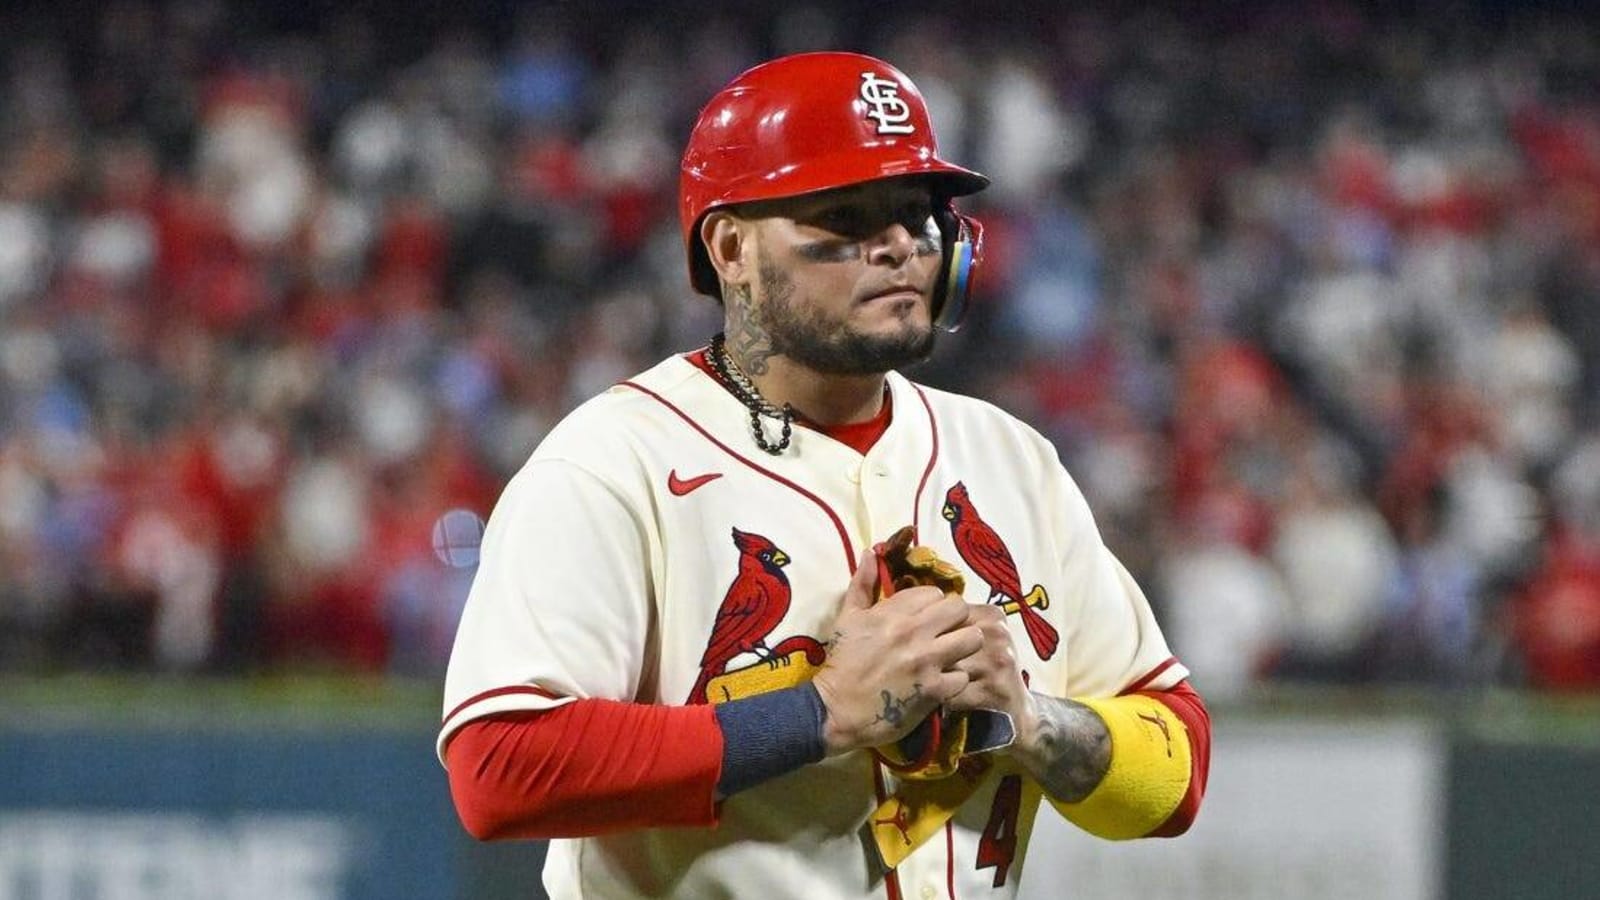 Cardinals bring back Yadier Molina in front-office role